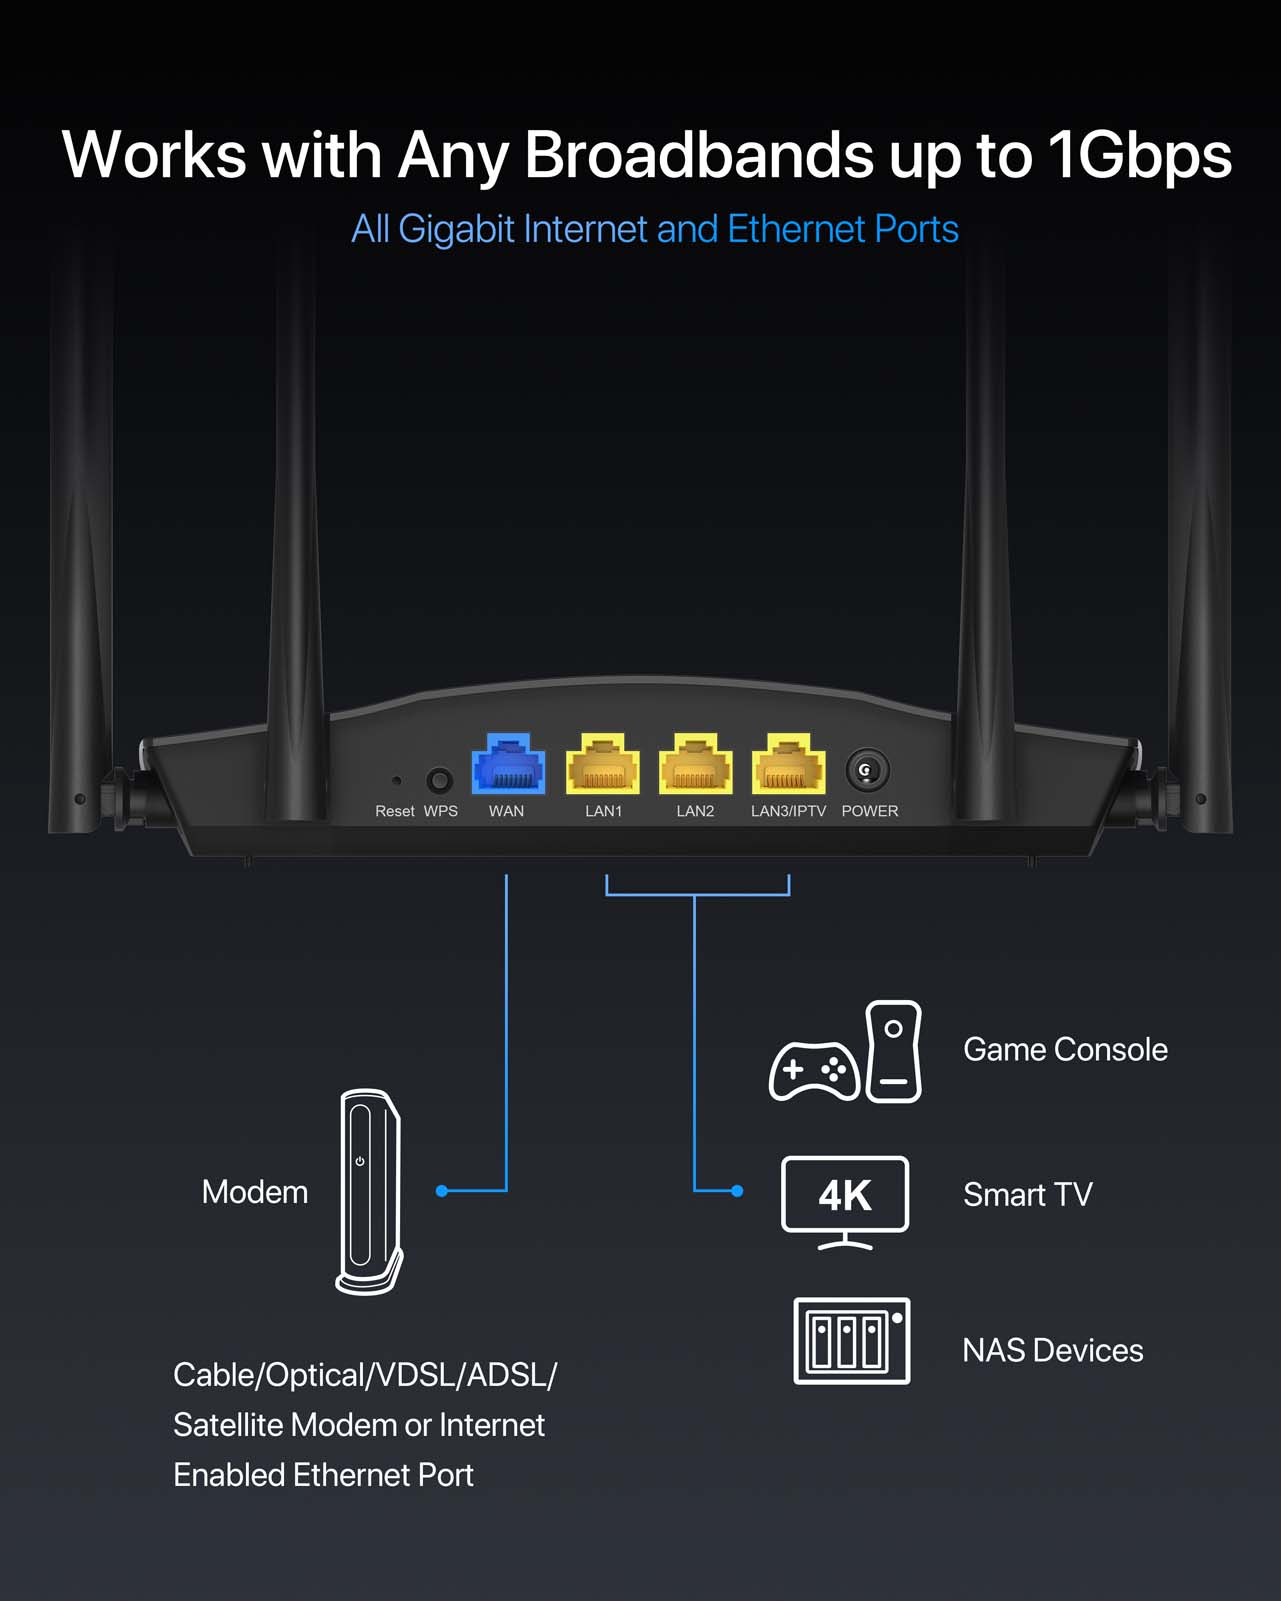 ioGiant wifi 6 router works with any broadbands up to 1Gbps.